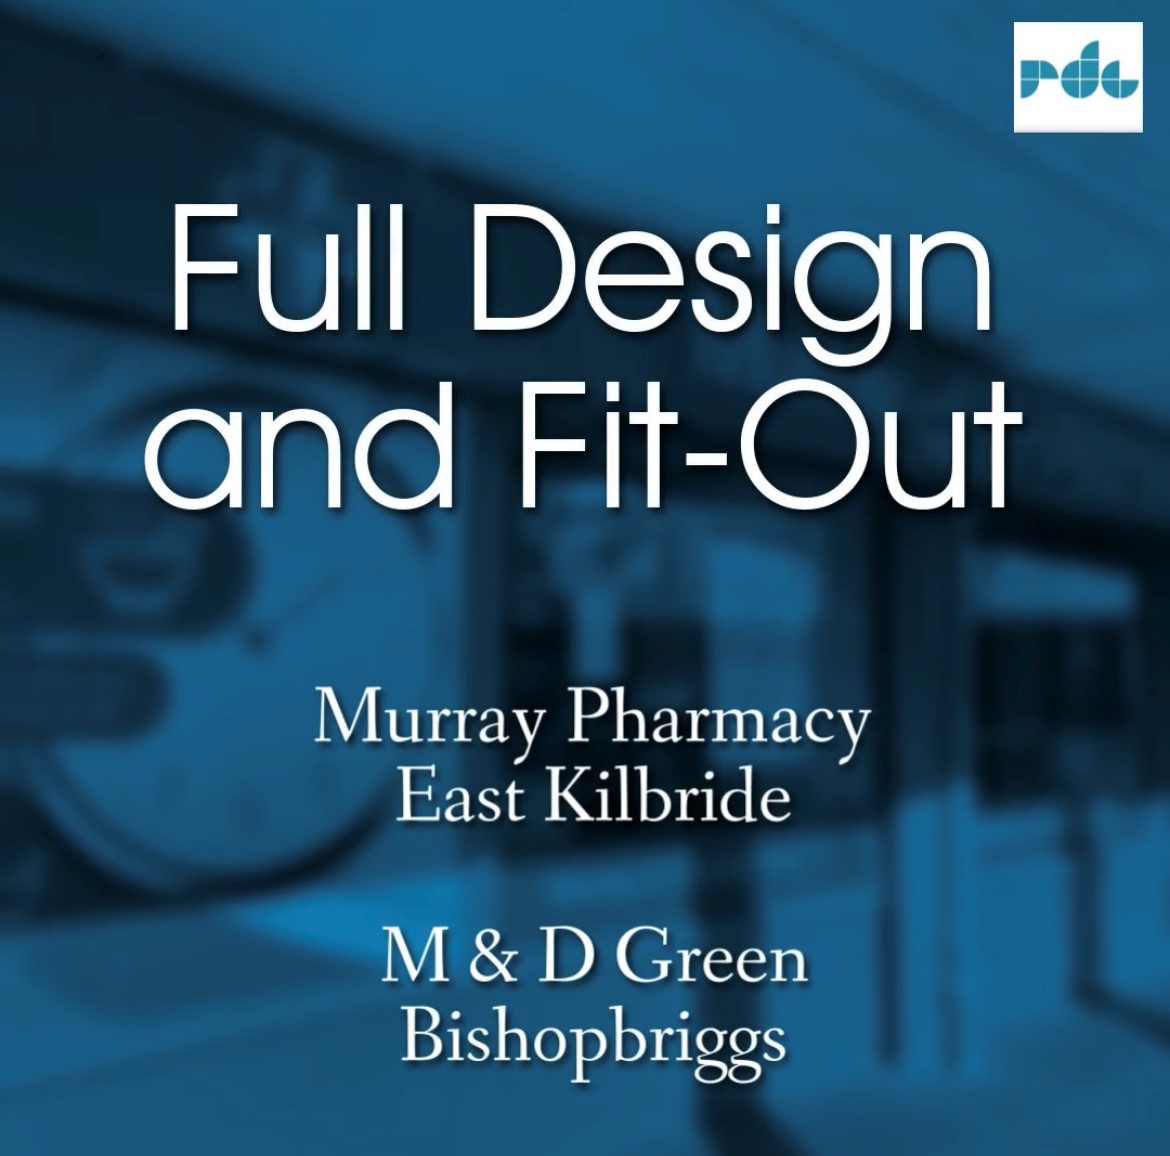 Pharmacy design and fit-out from Retail Design Consultants